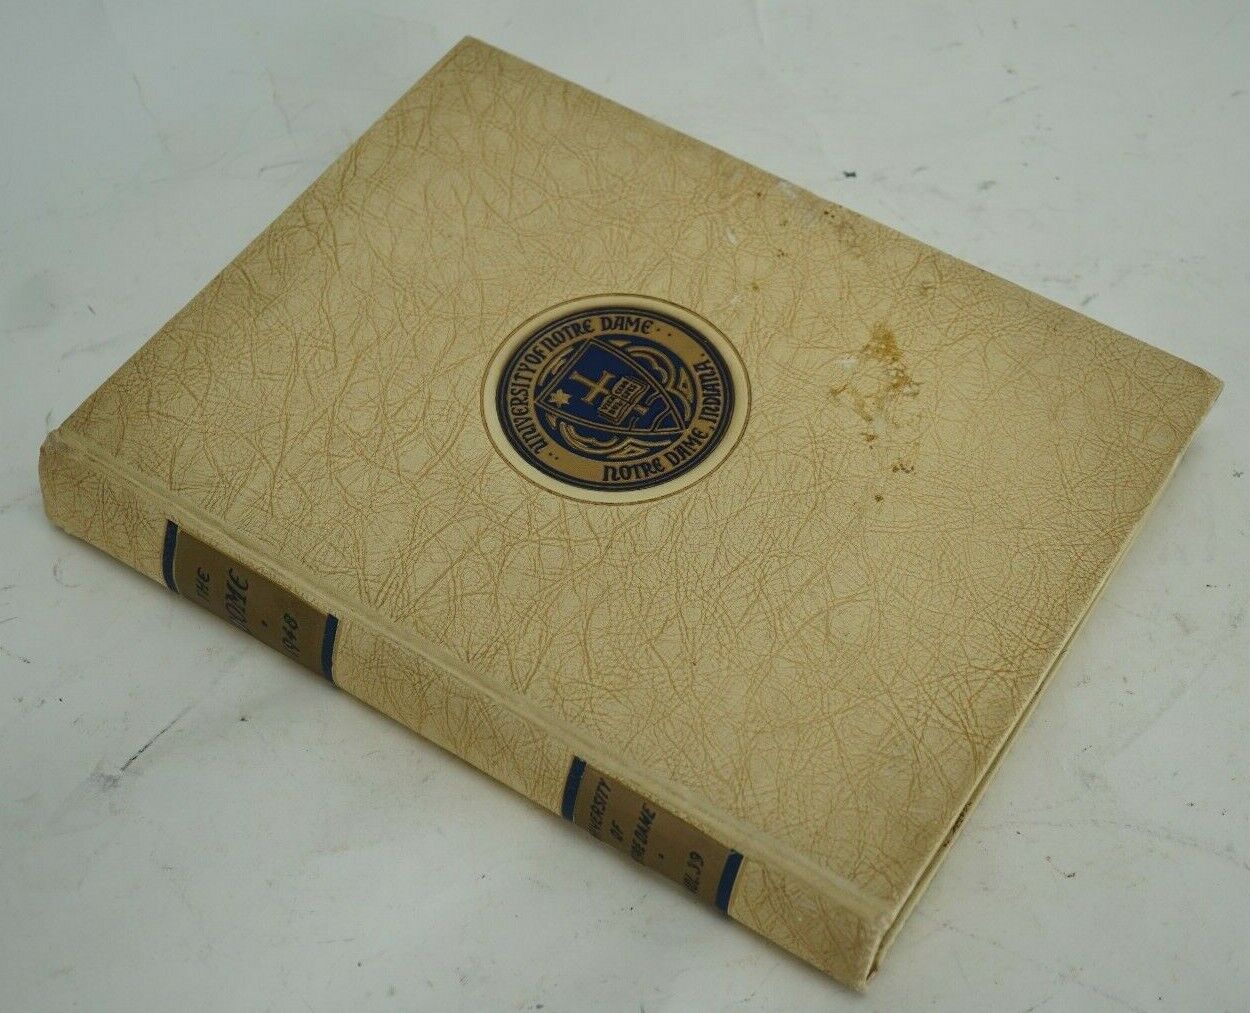 1948 University of Notre Dame The Dome Yearbook